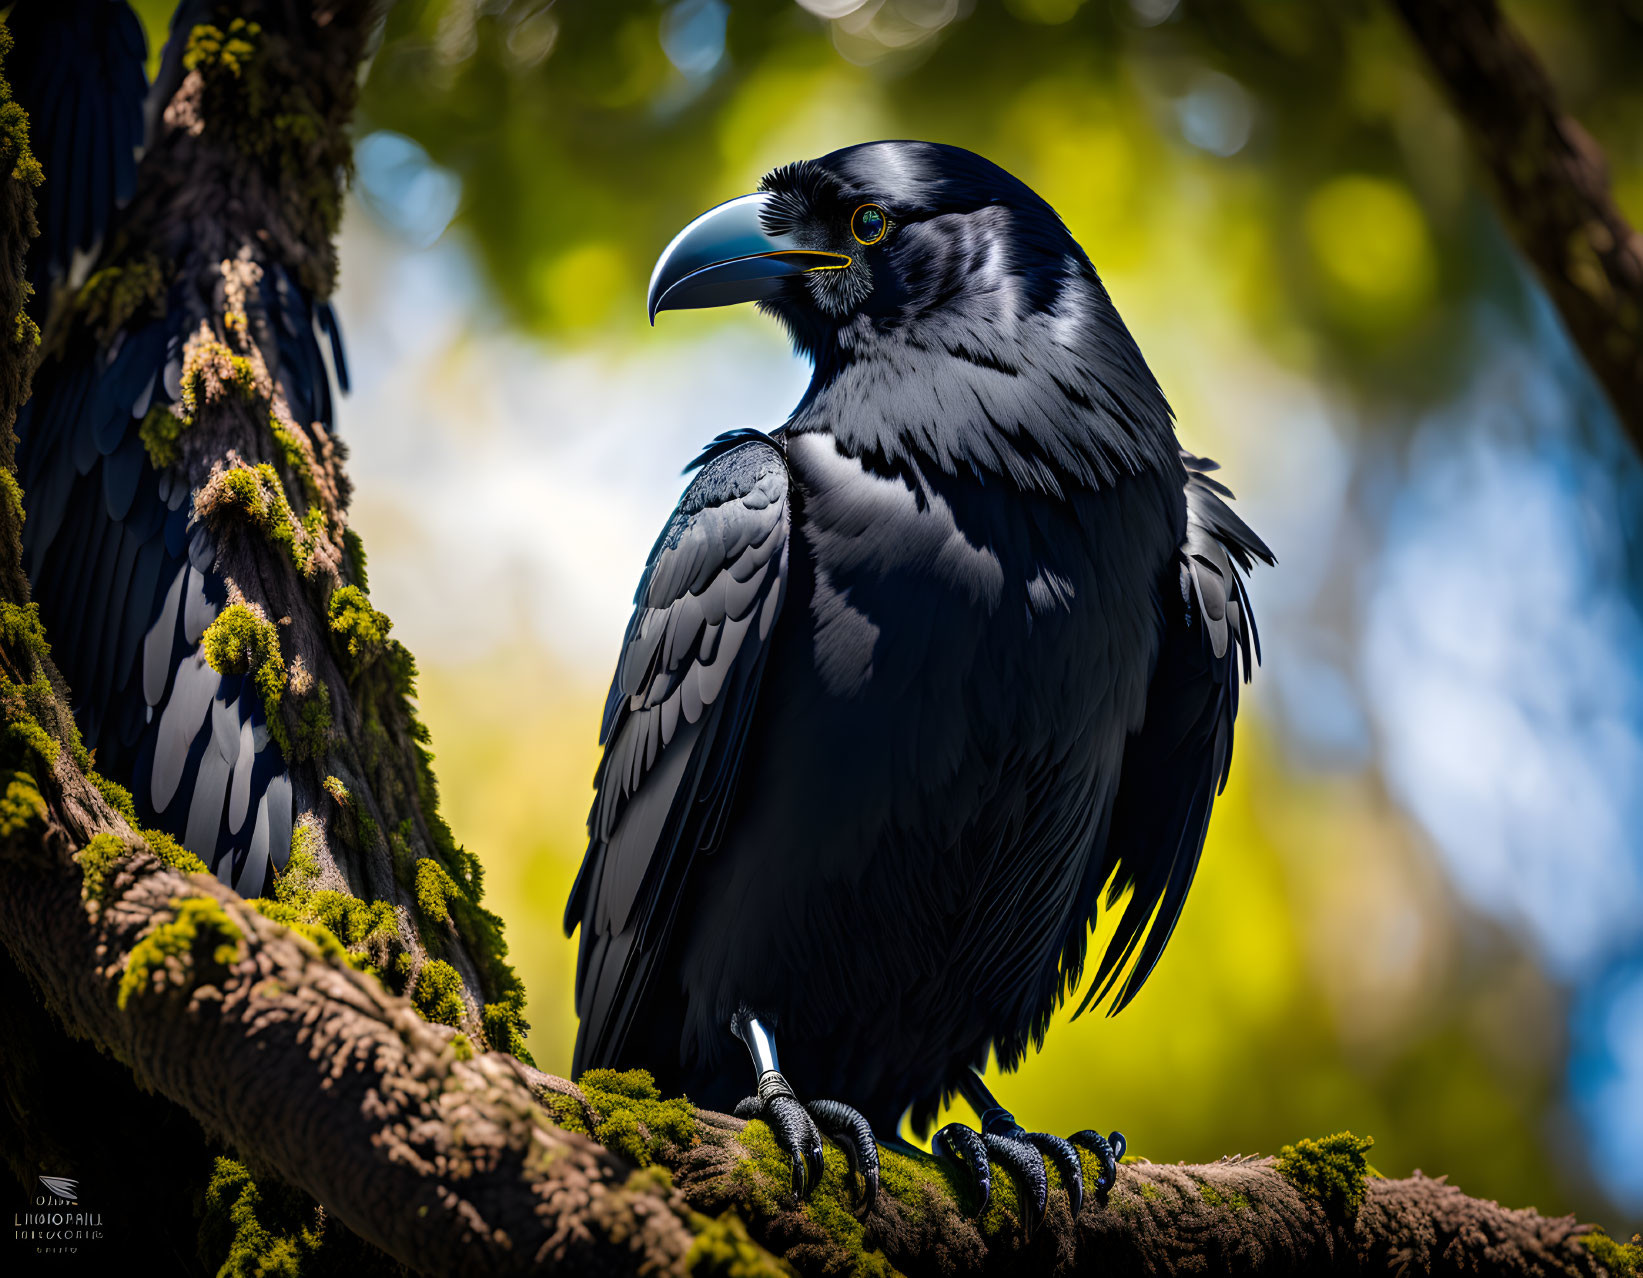 Majestic black raven on moss-covered branch with green foliage background